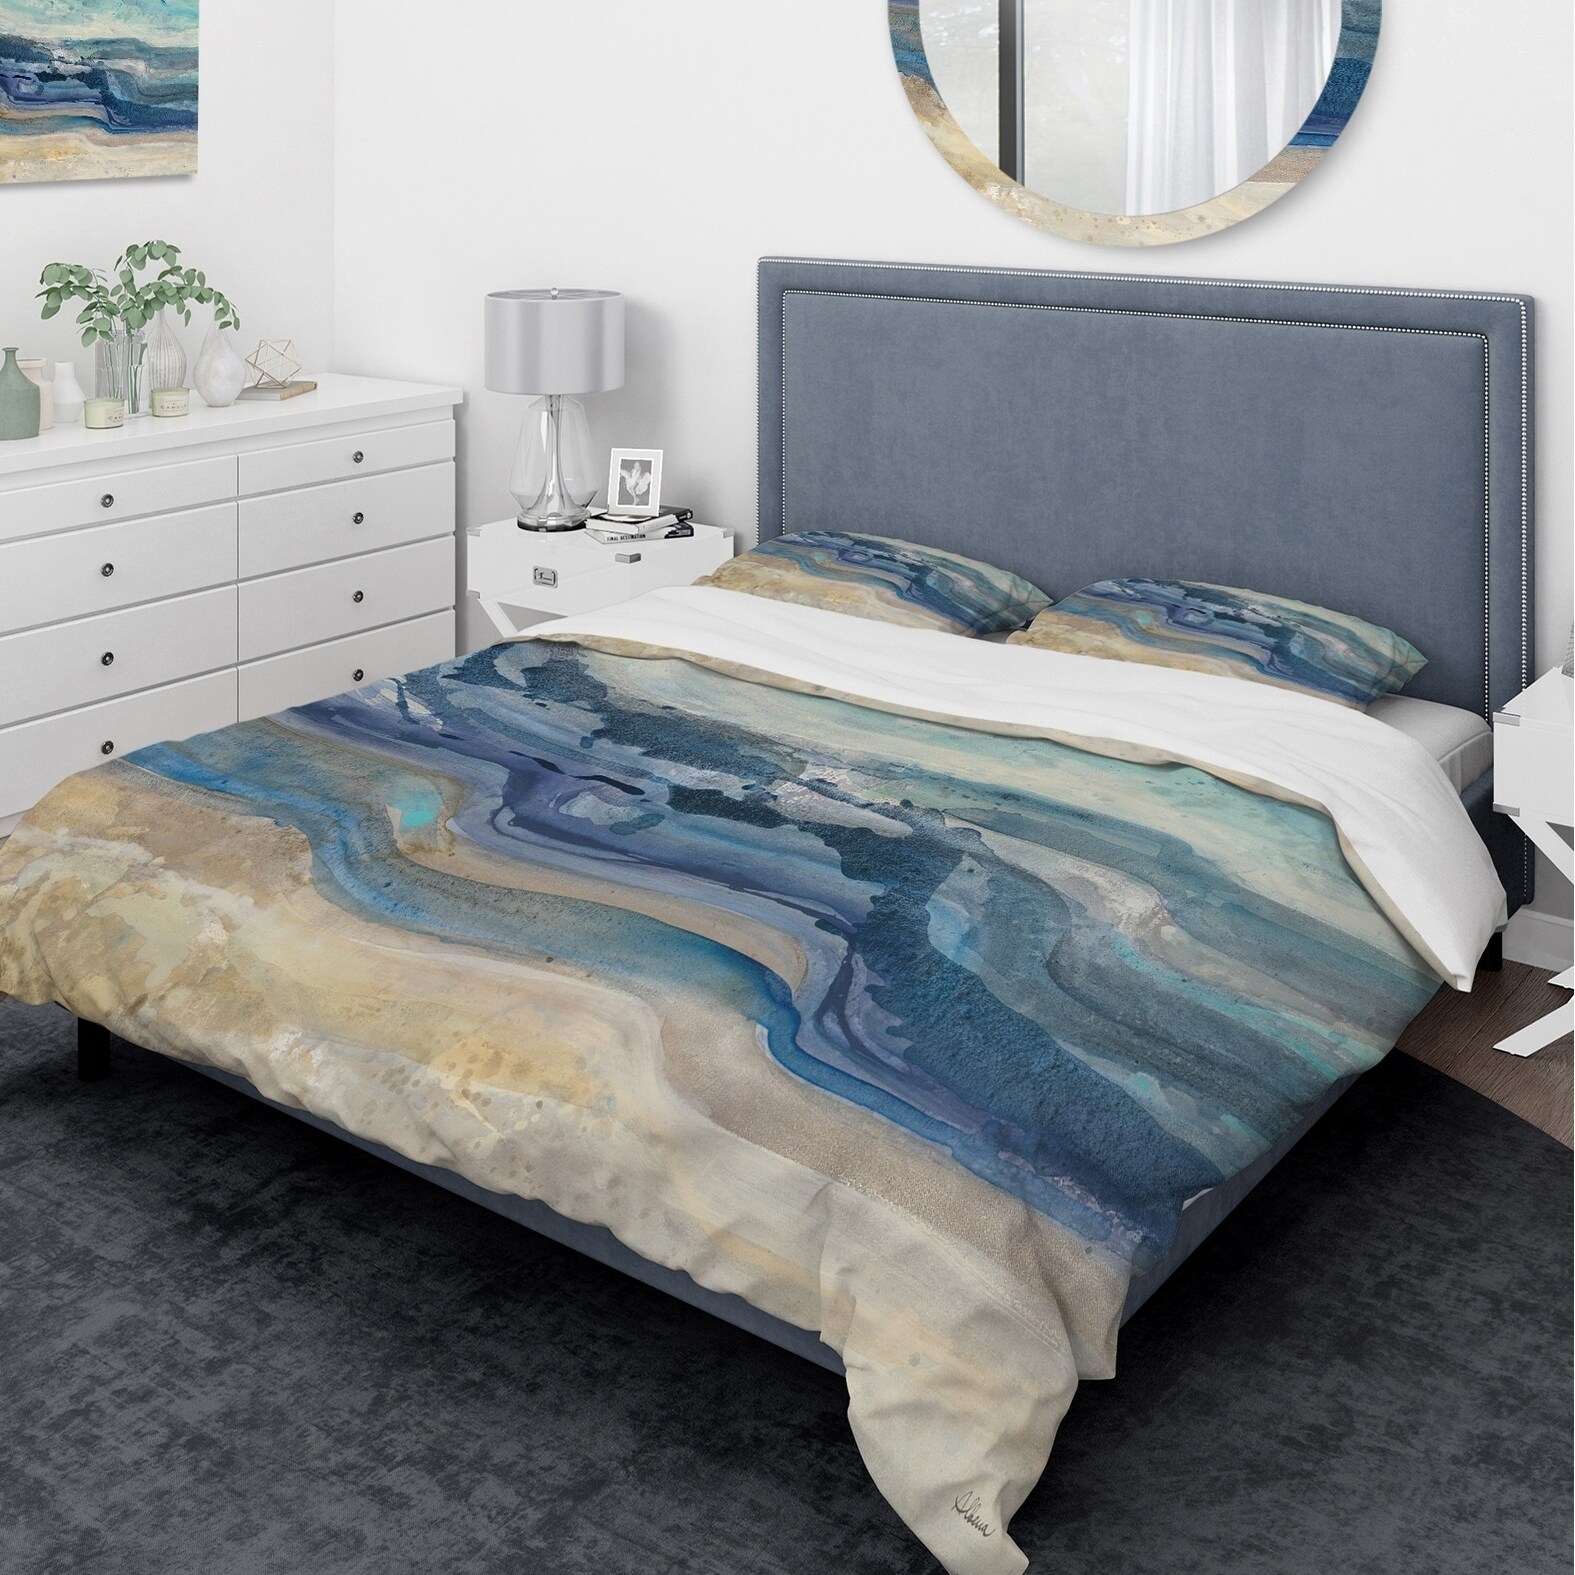 Heartgown Wave Ocean Duvet Cover Set Sea Waves Nautical Bedding Set Hand Drawn Style Japanese Motifs Illustration Wave Bedding Ukiyoe Themed with 1 Pillow Case 